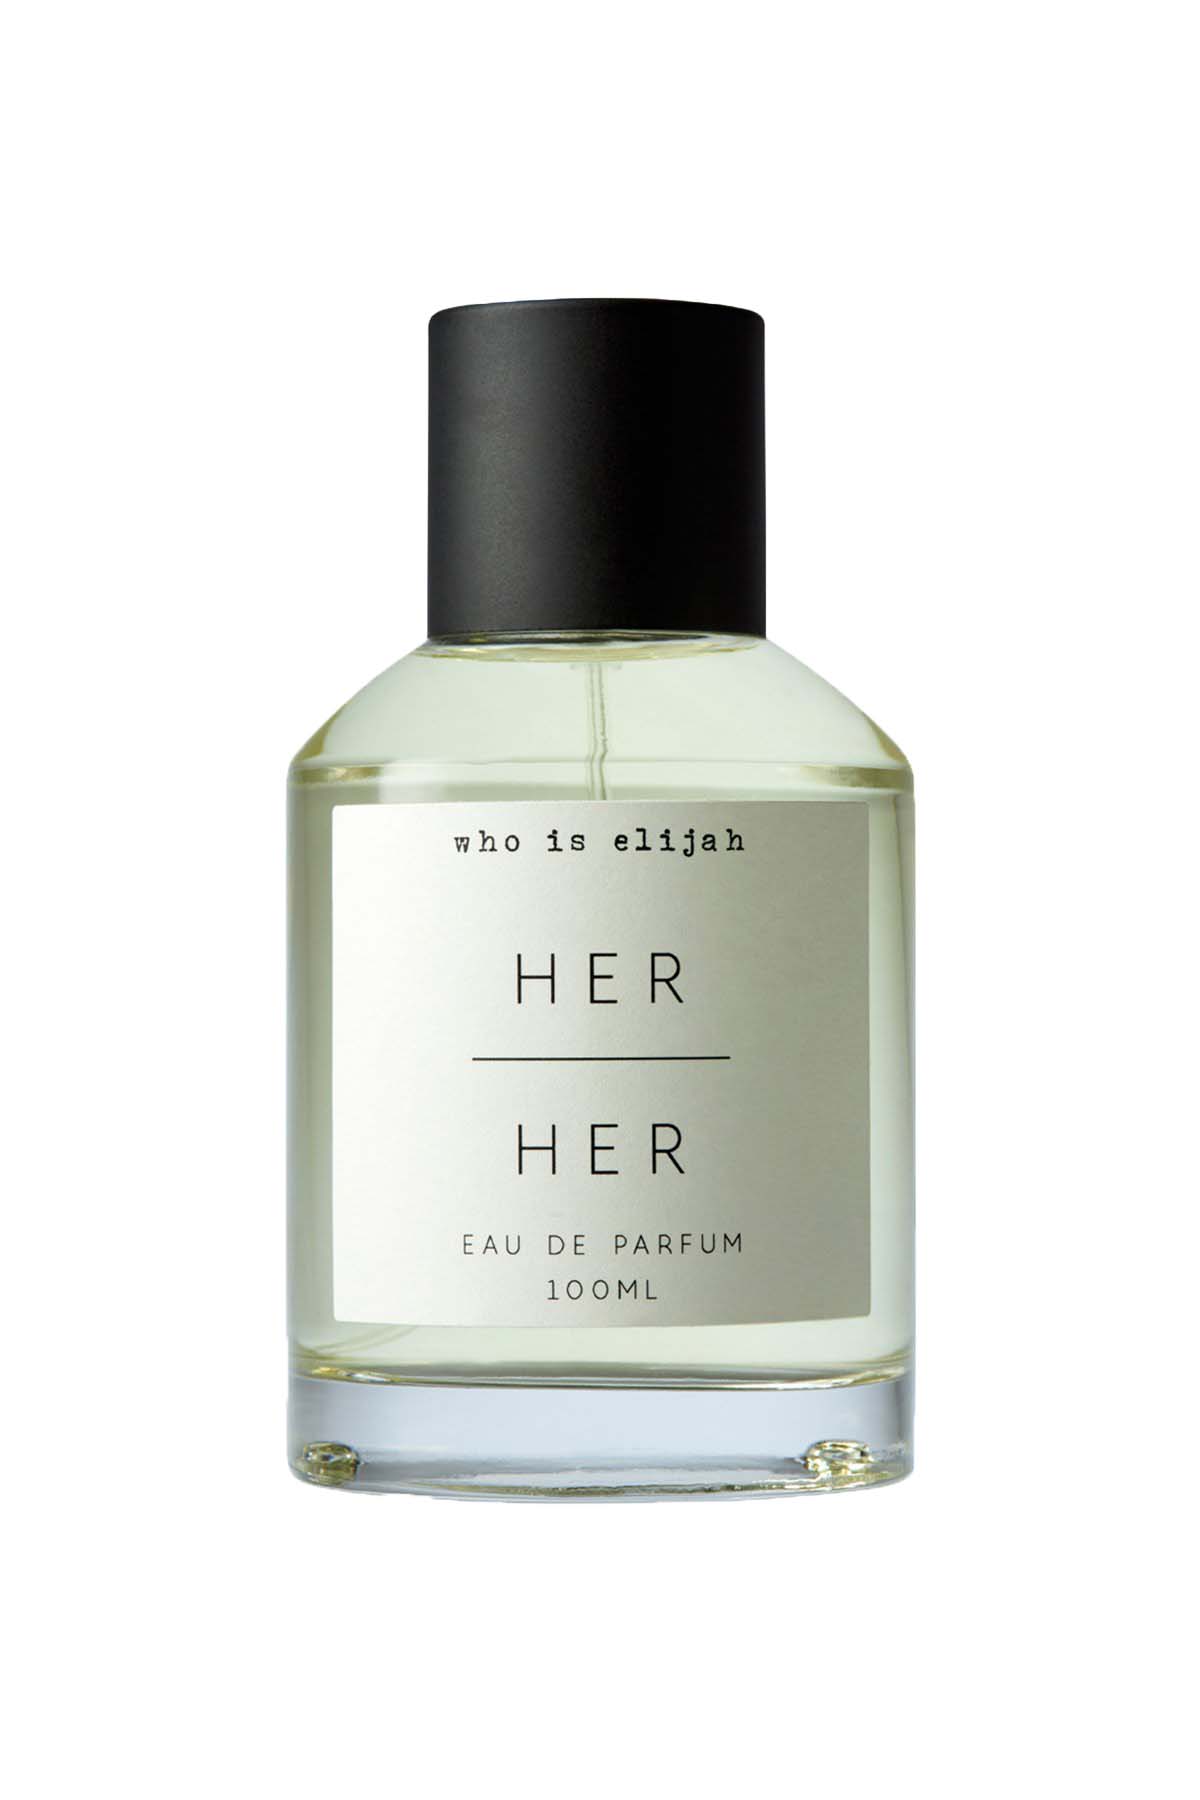 HER | HER perfume